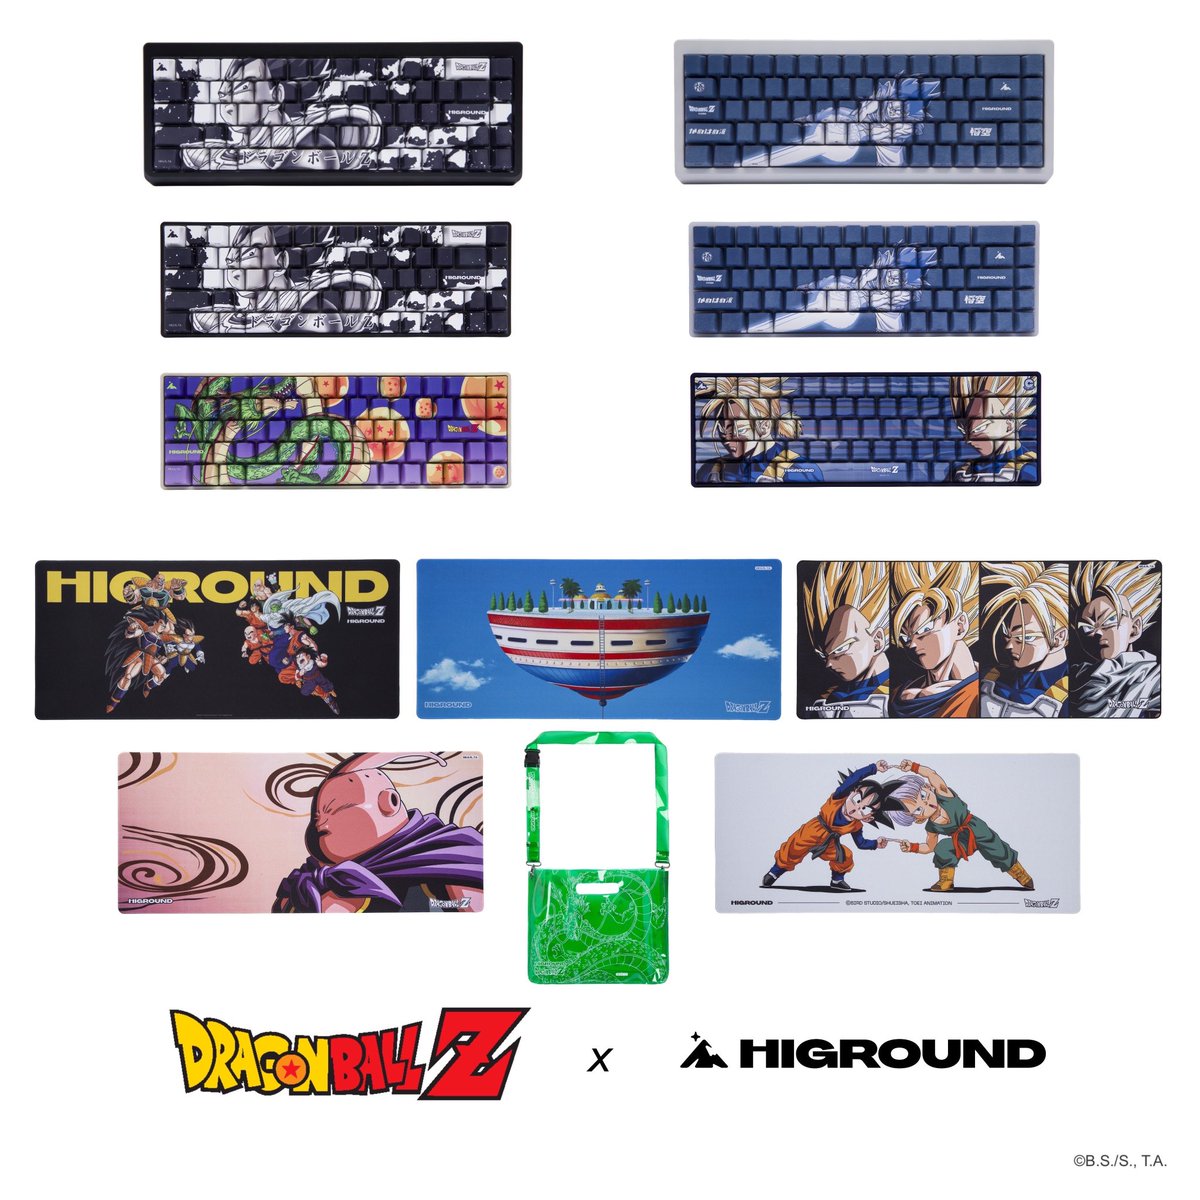 Available Now: DBZ x Higround Limited Drop higround.co